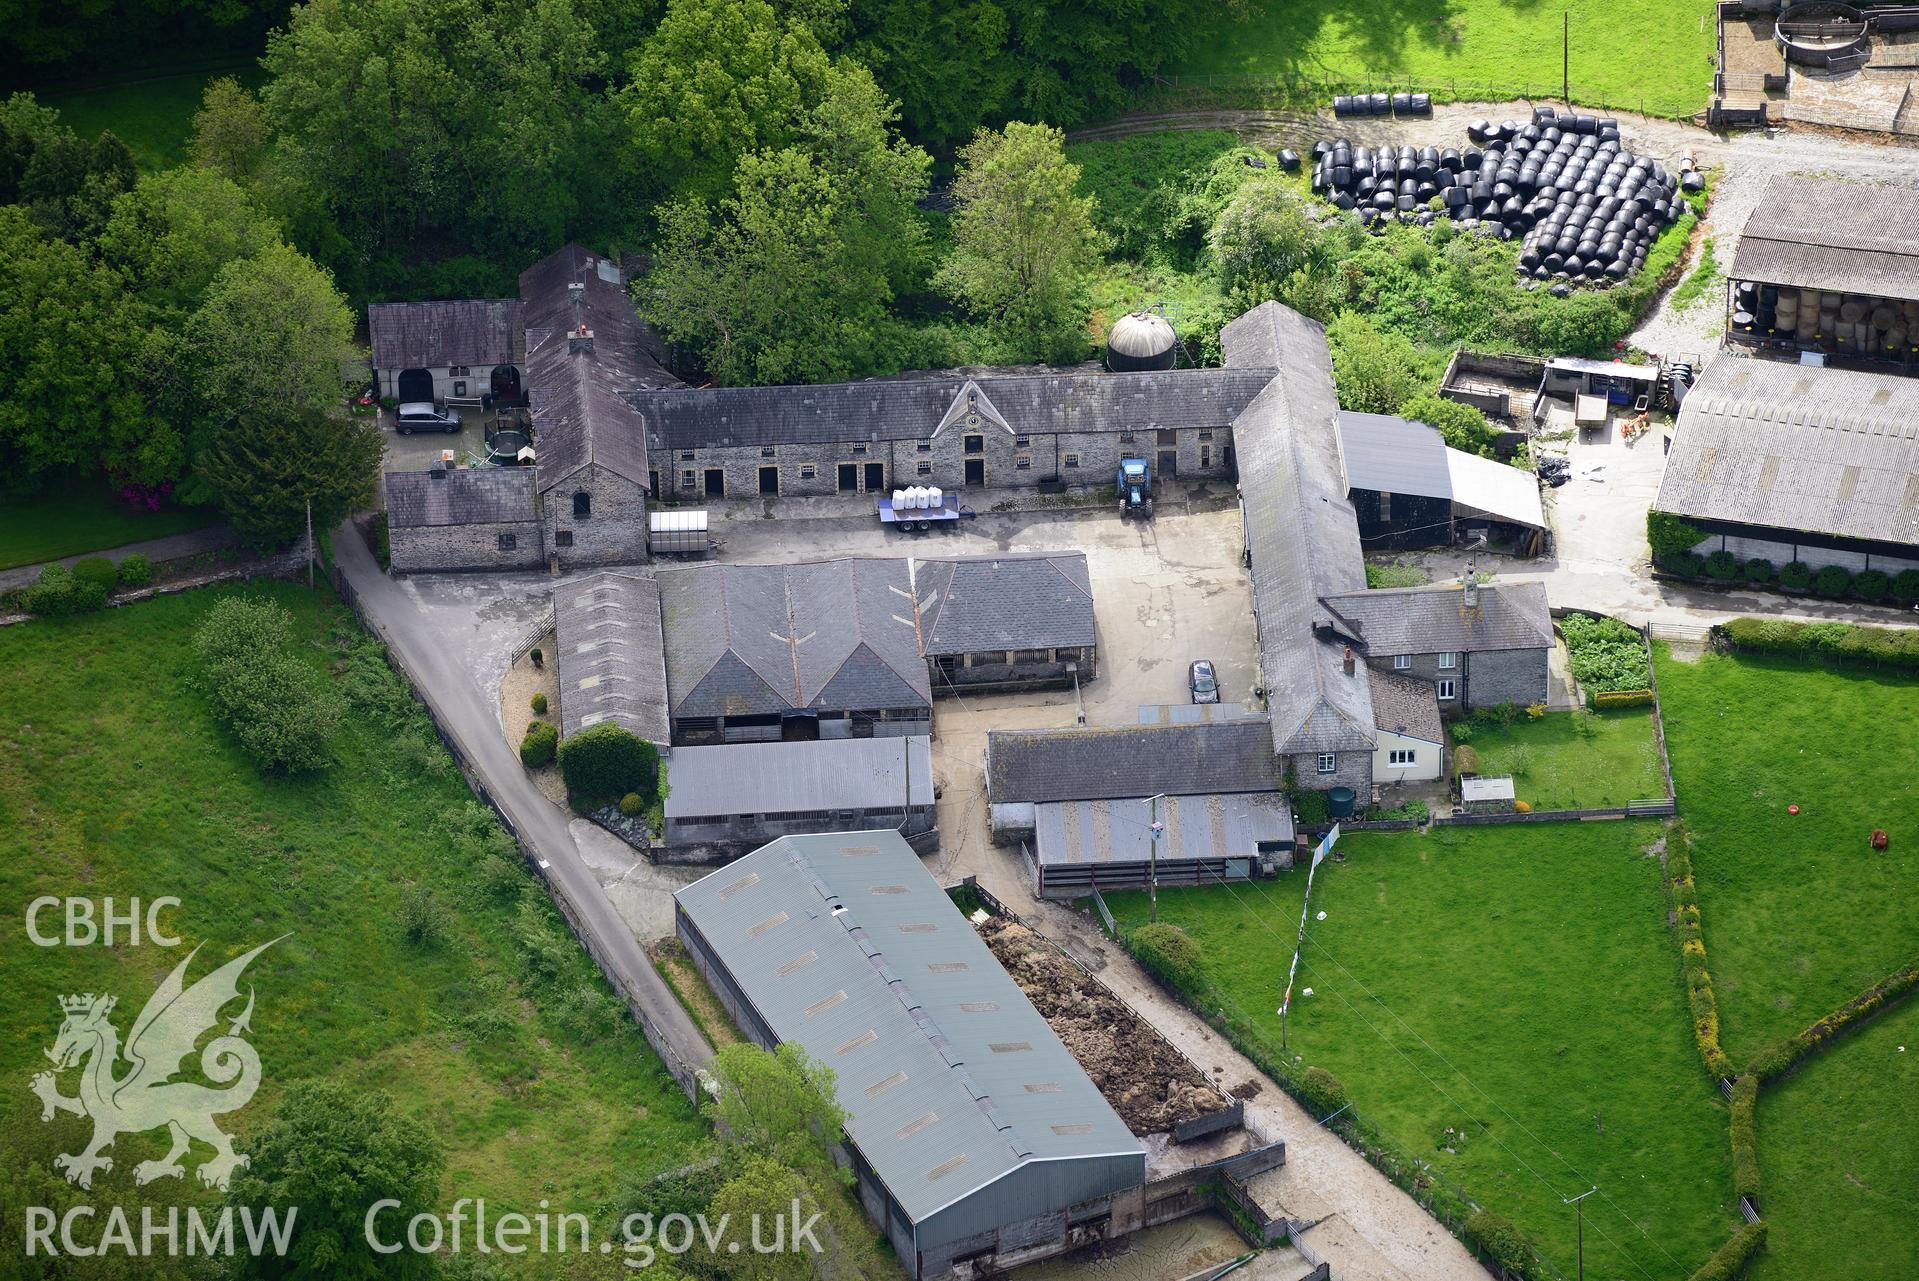 Falcondale Home Farm and Coach House, Lampeter. Oblique aerial photograph taken during the Royal Commission's programme of archaeological aerial reconnaissance by Toby Driver on 3rd June 2015.